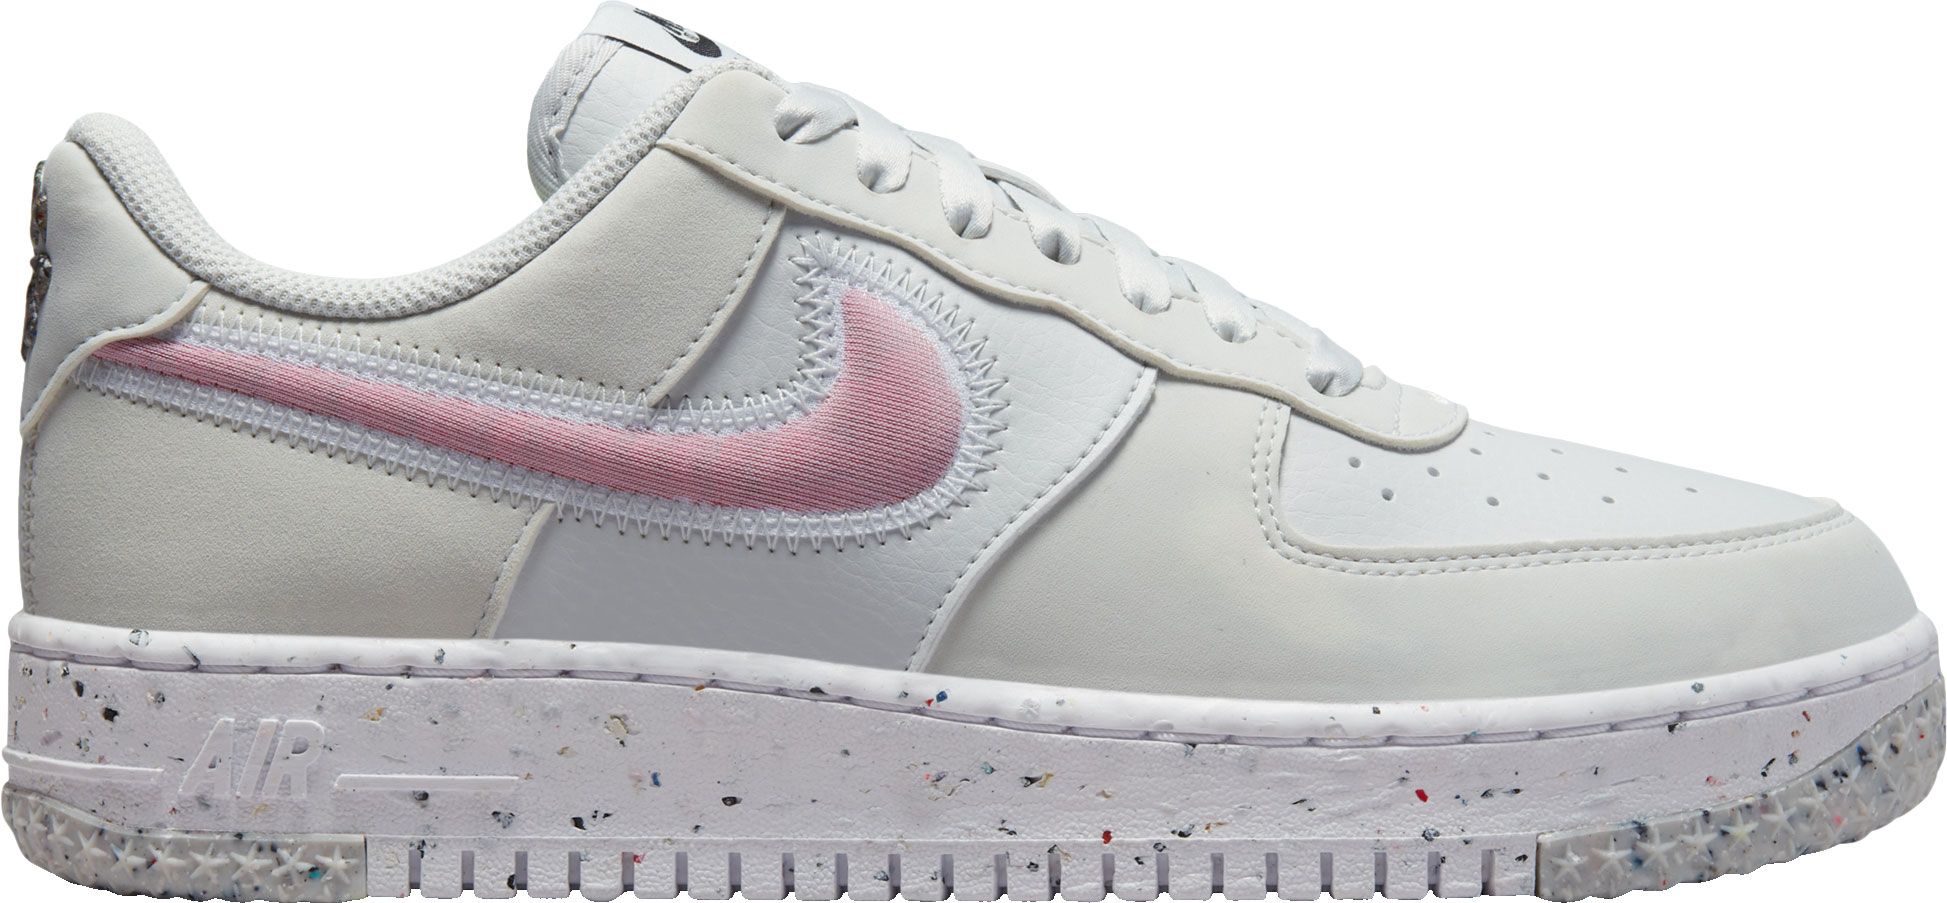 nike women's air force 1 crater